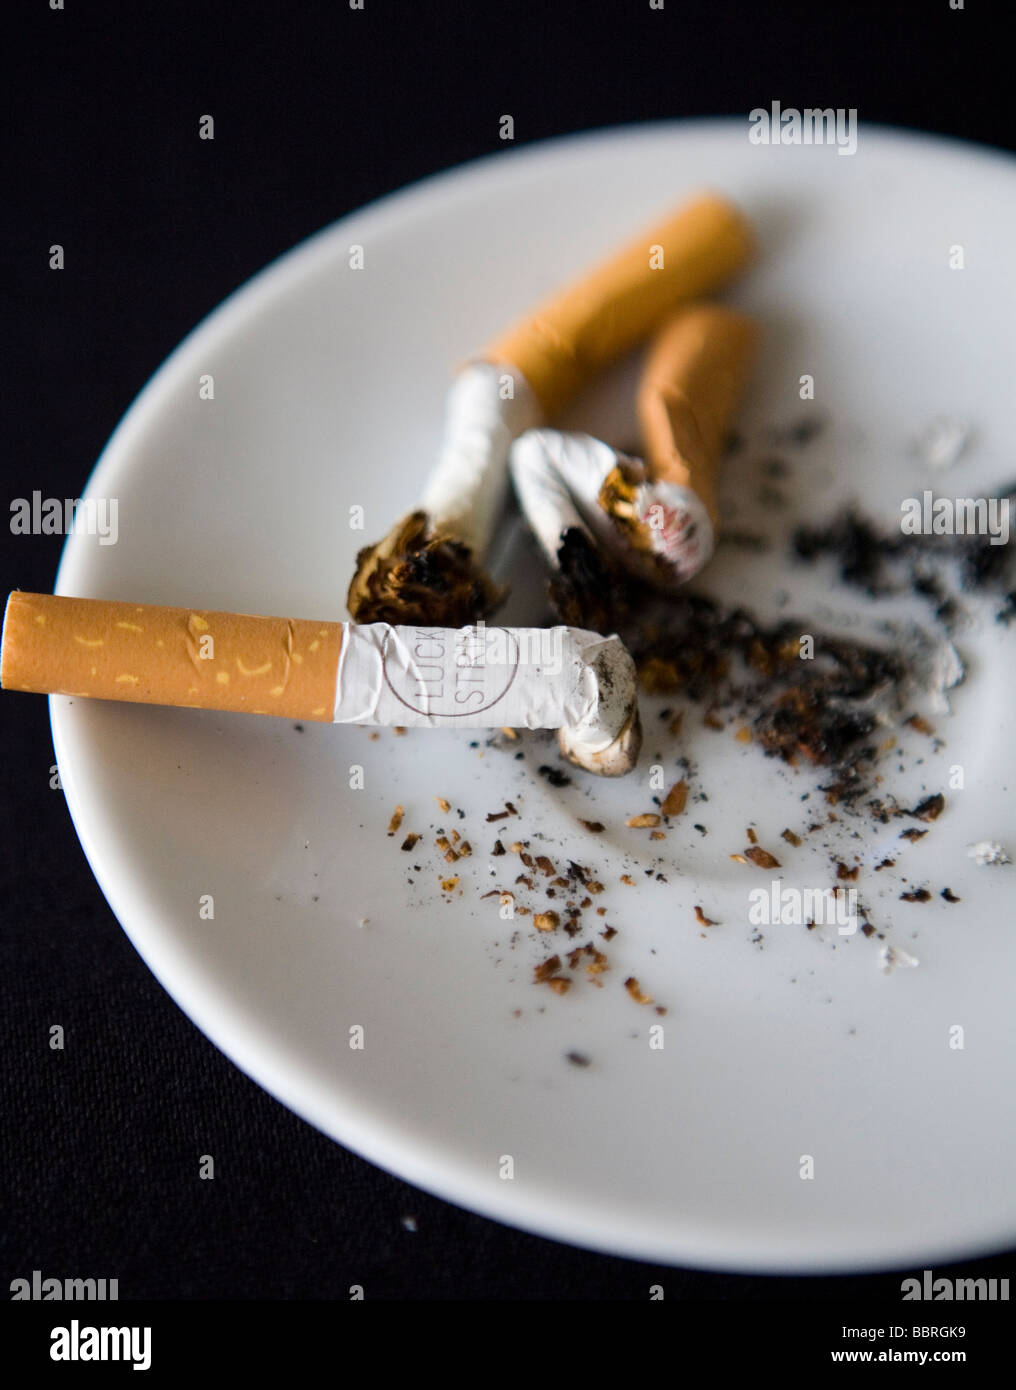 Cigarettes made by British American Tobacco in an ashtray Stock Photo